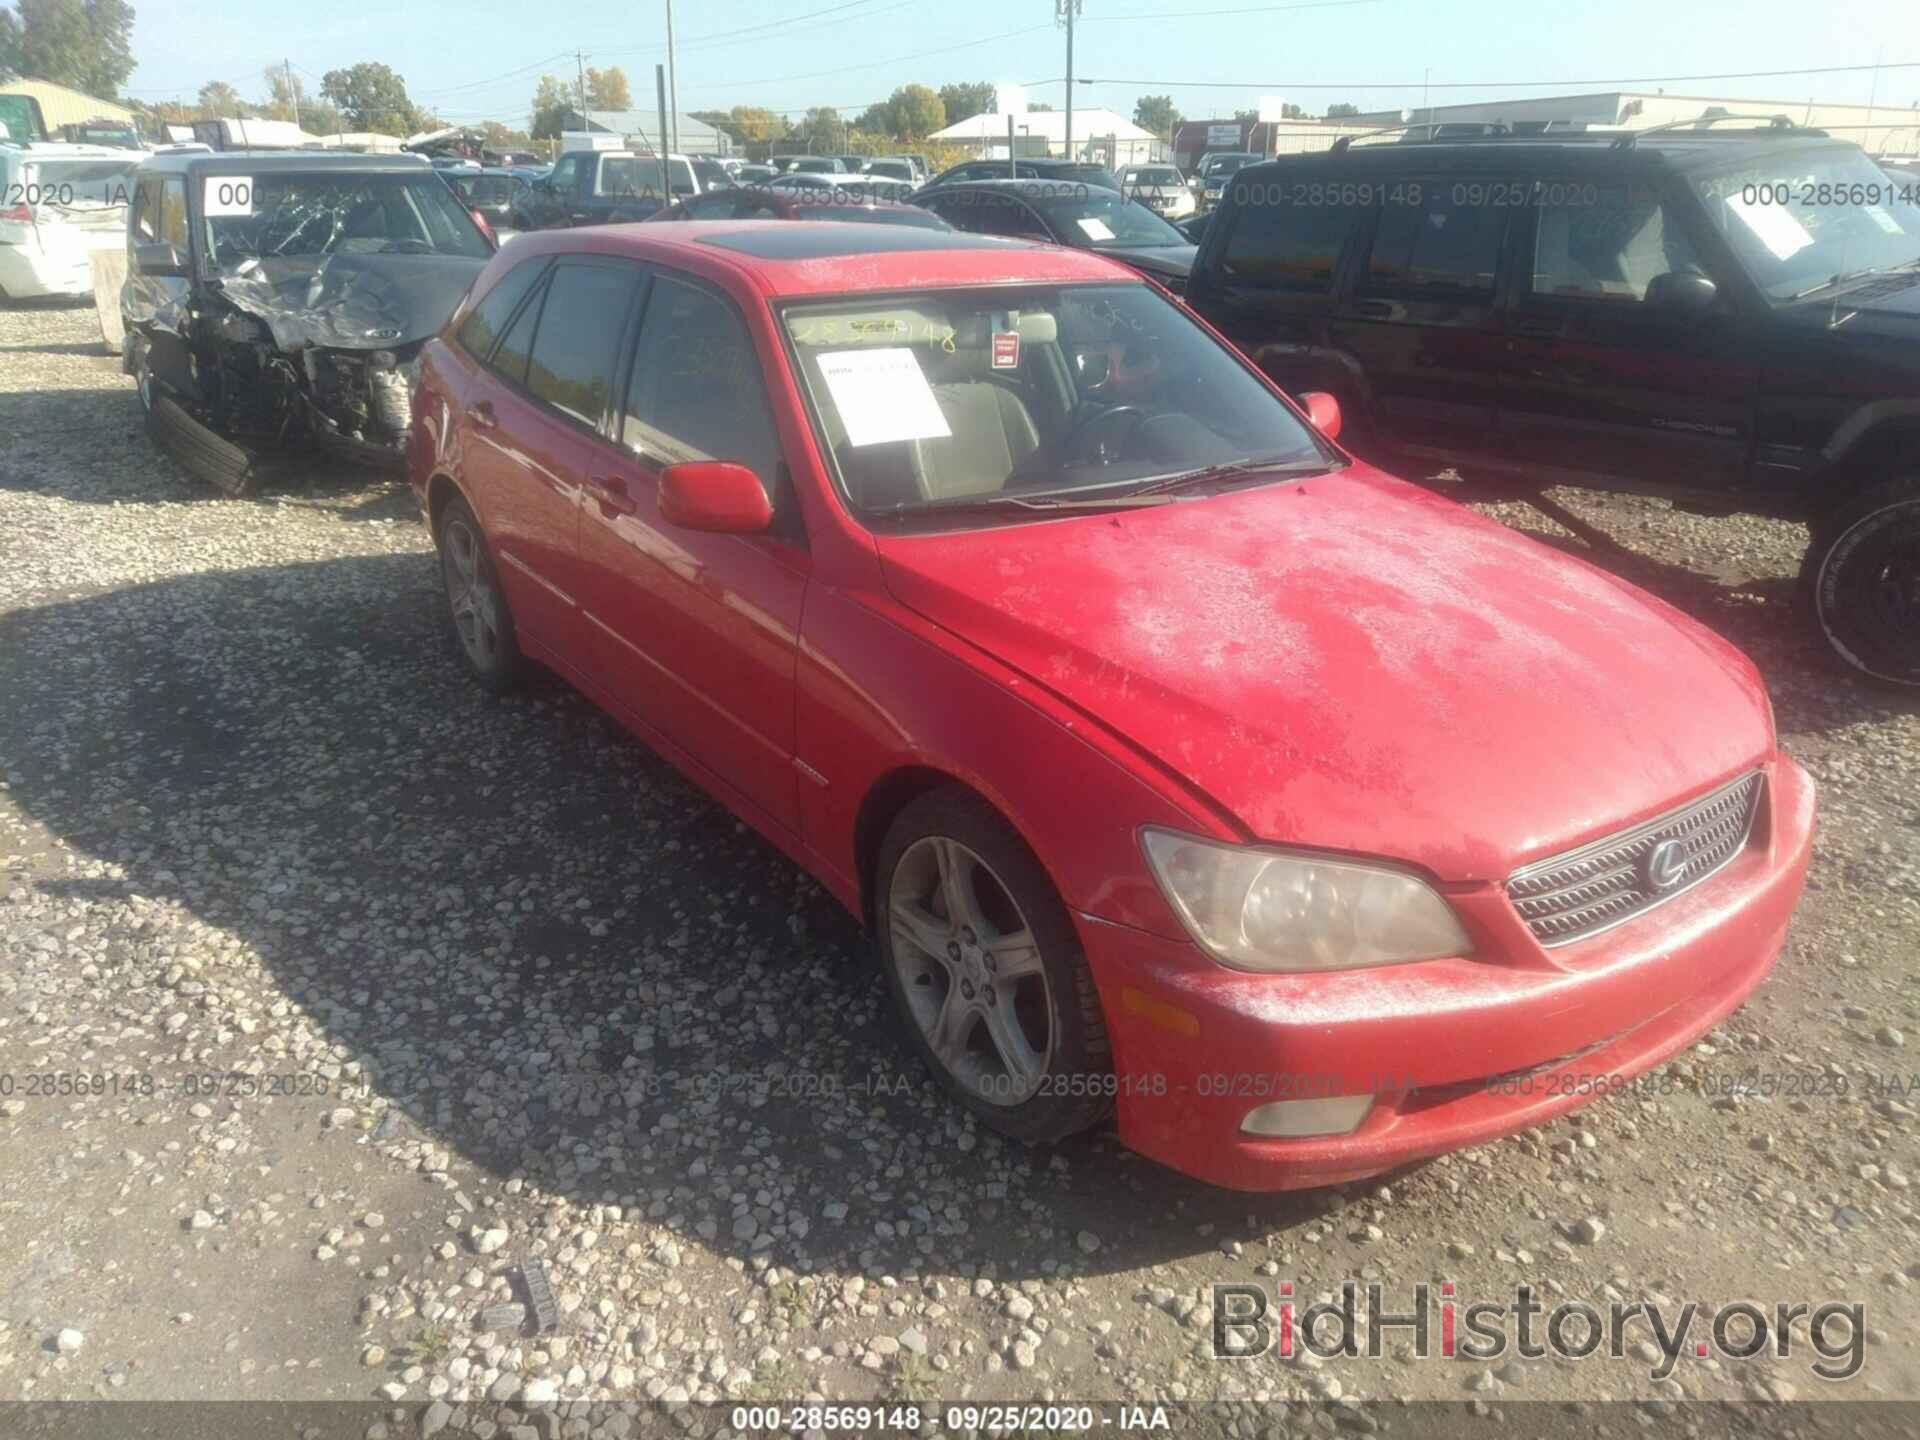 Photo JTHED192120038648 - LEXUS IS 300 2002